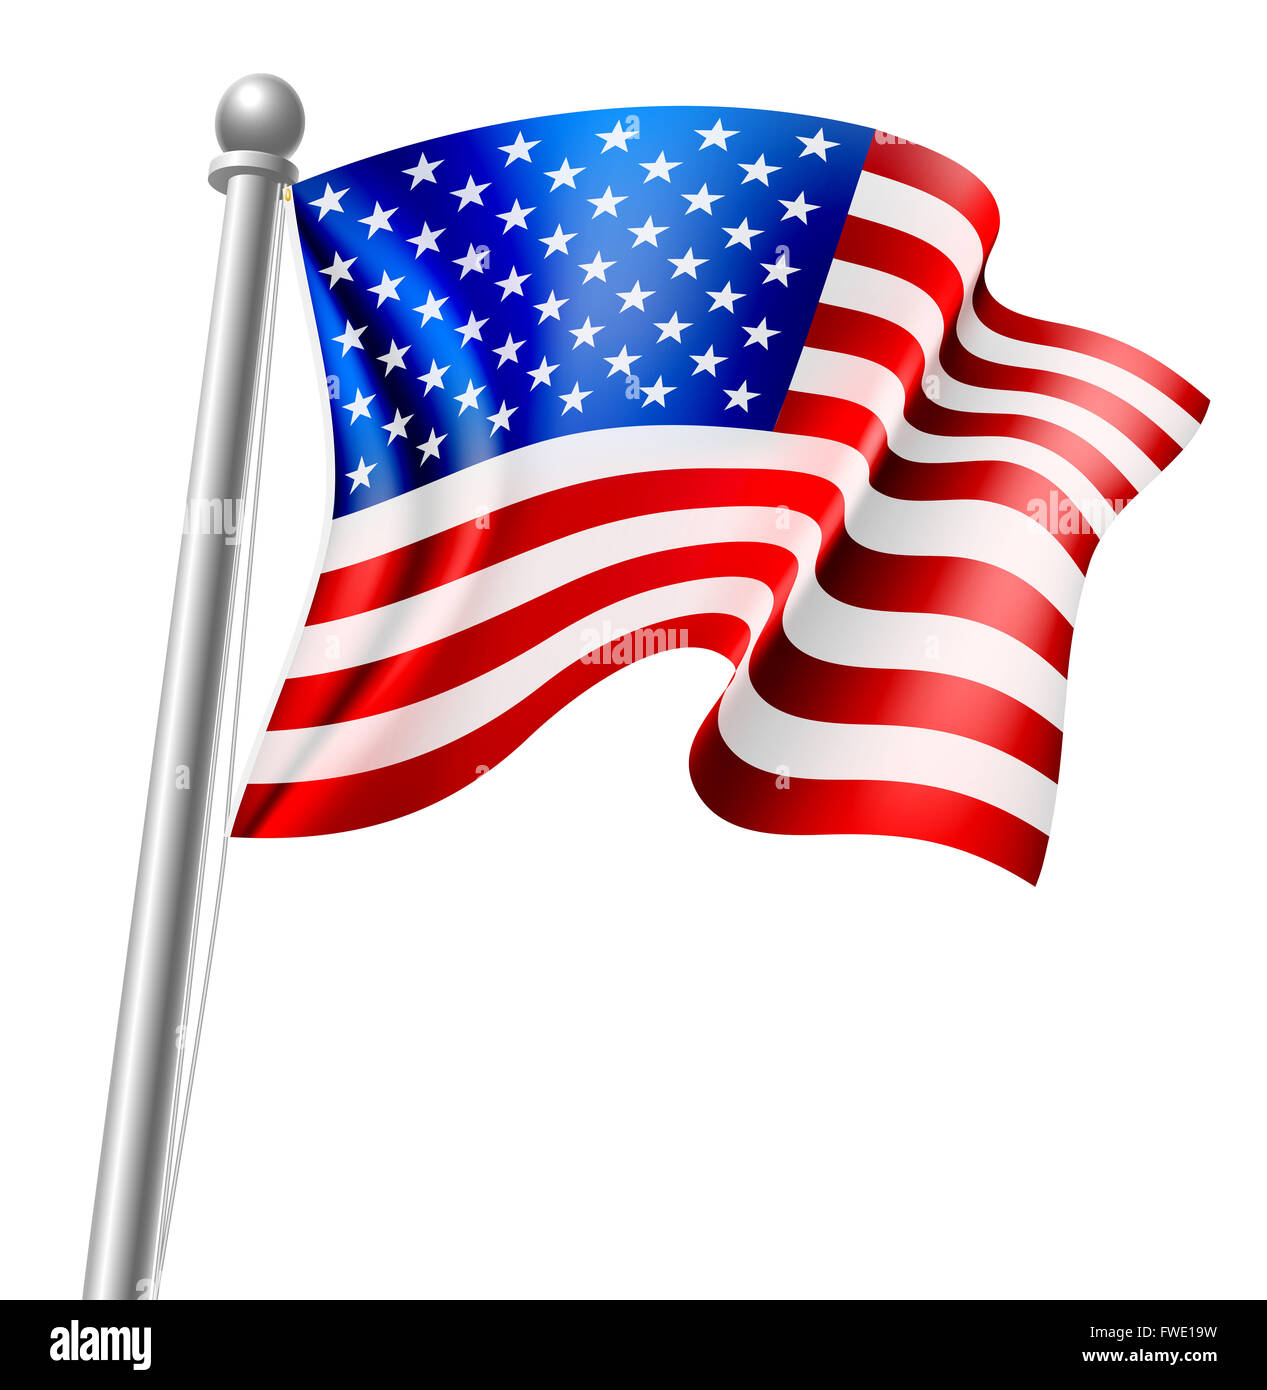 An illustration of the American flag on a flag pole Stock Photo